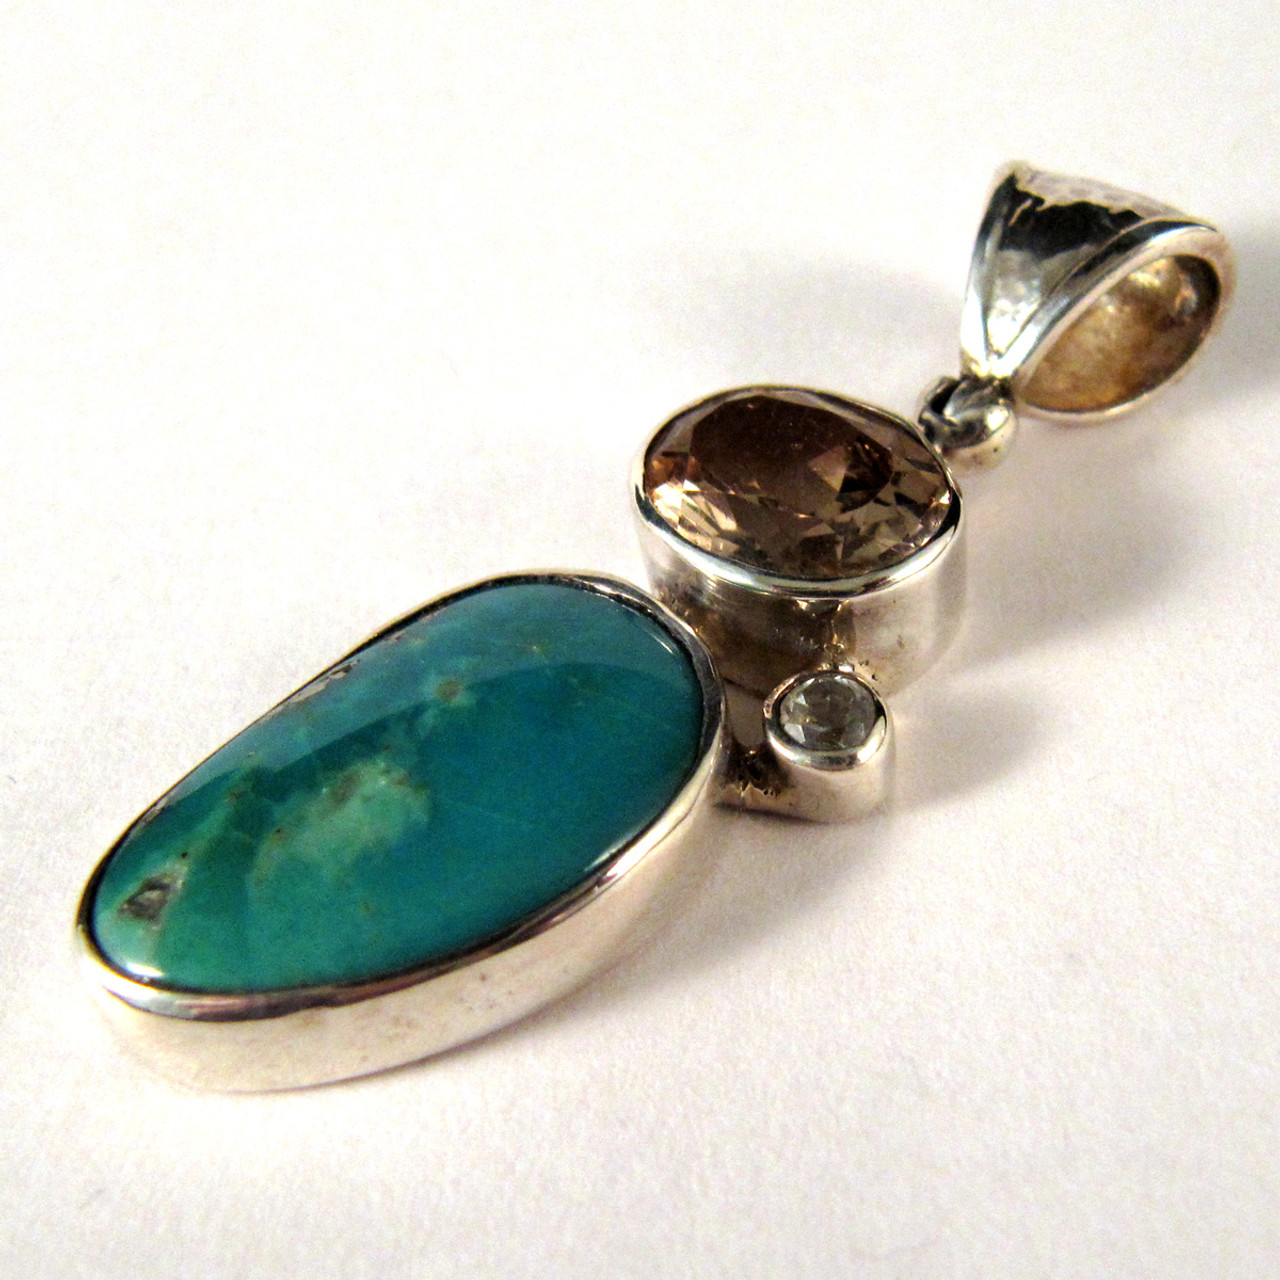 Turquoise and Topaz Pendant - JNEC130 - Enter the Earth, Inc